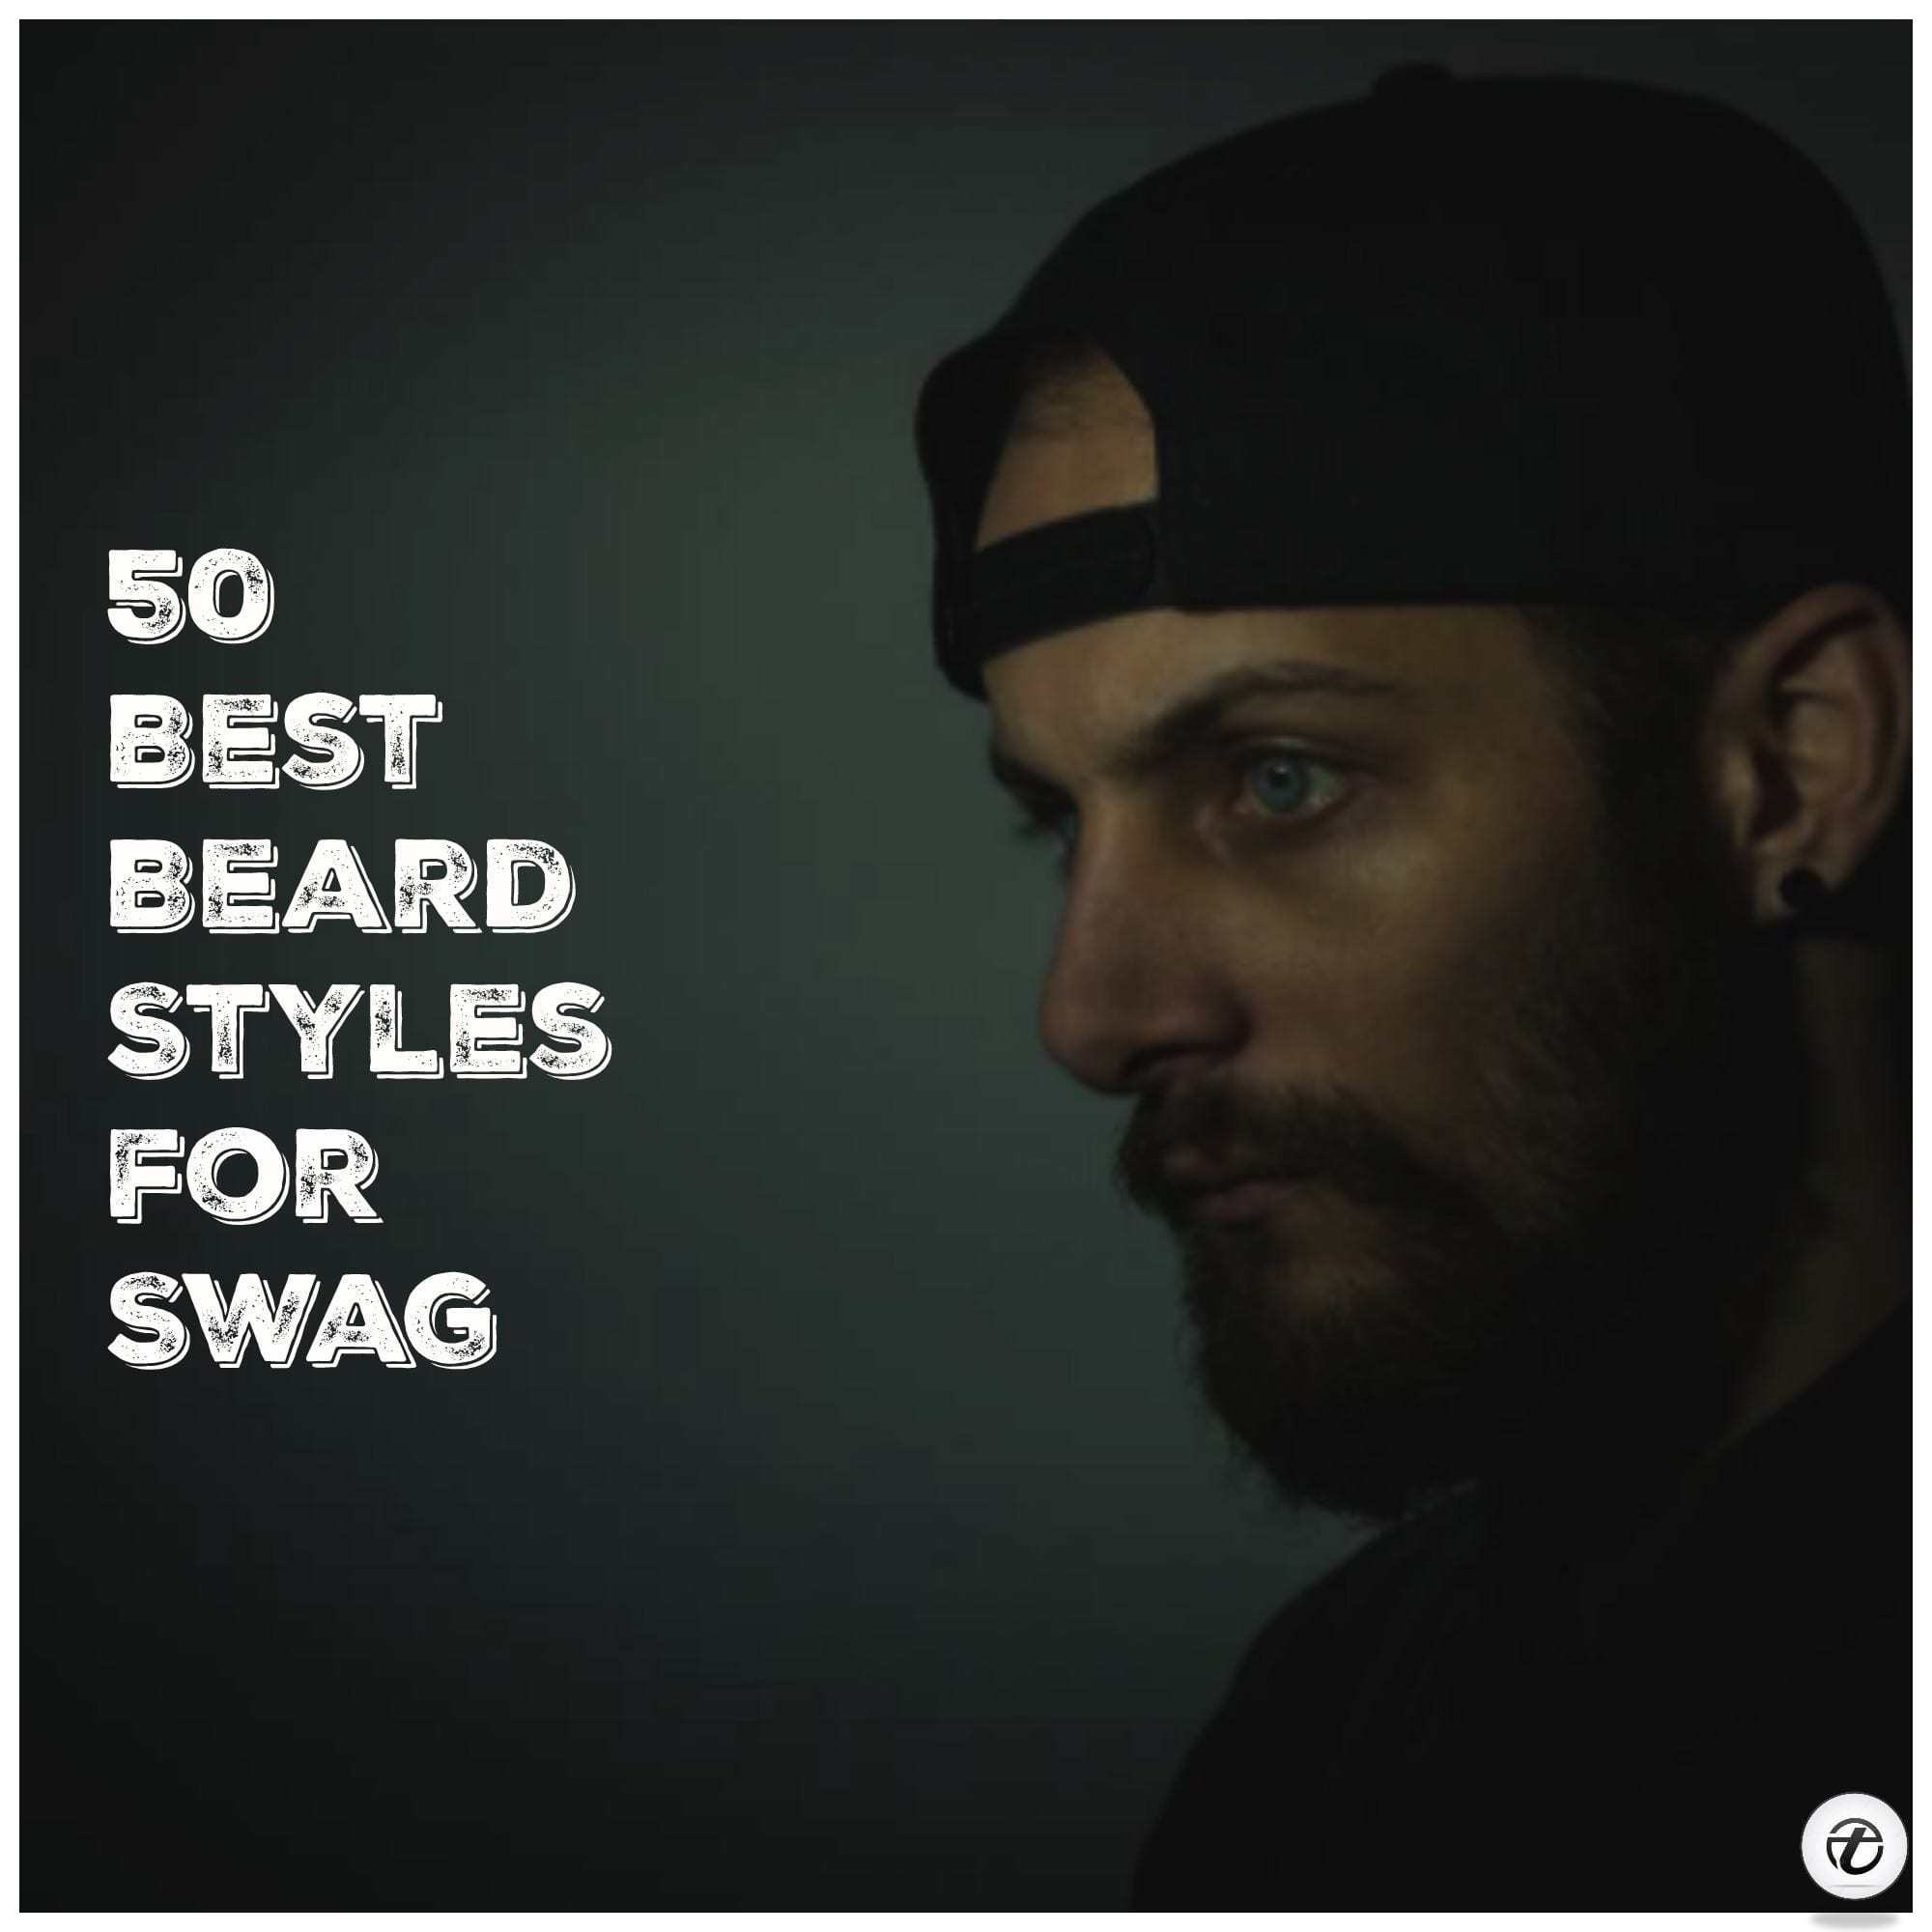 beard styles for swag